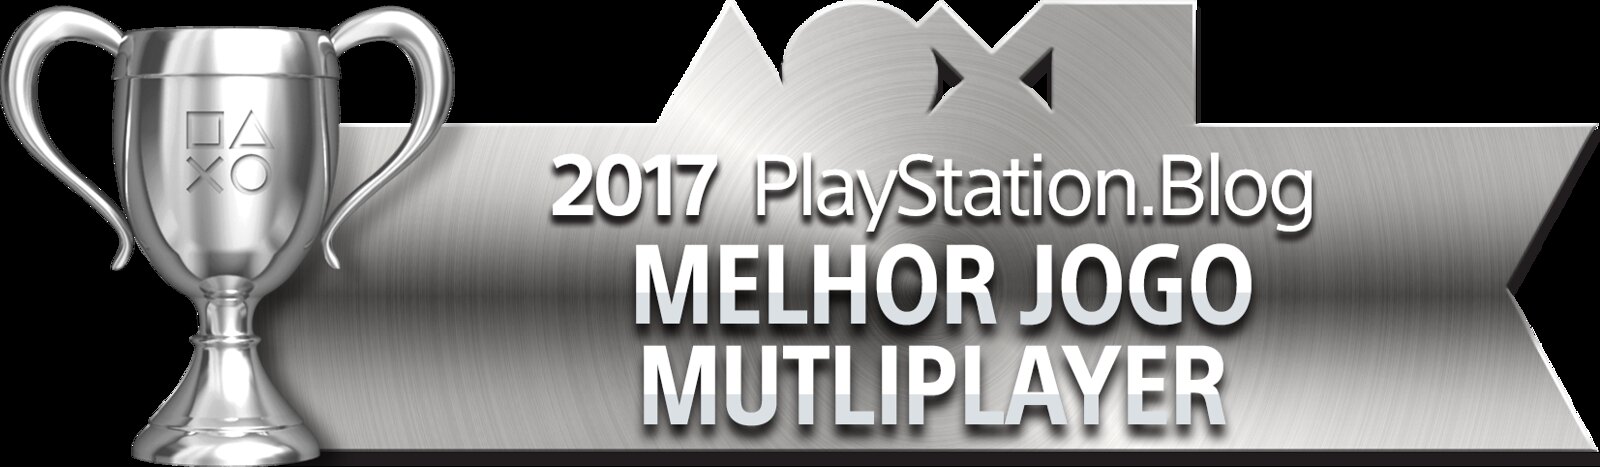 PlayStation Blog Game of the Year 2017 - Best Multiplayer (Silver)